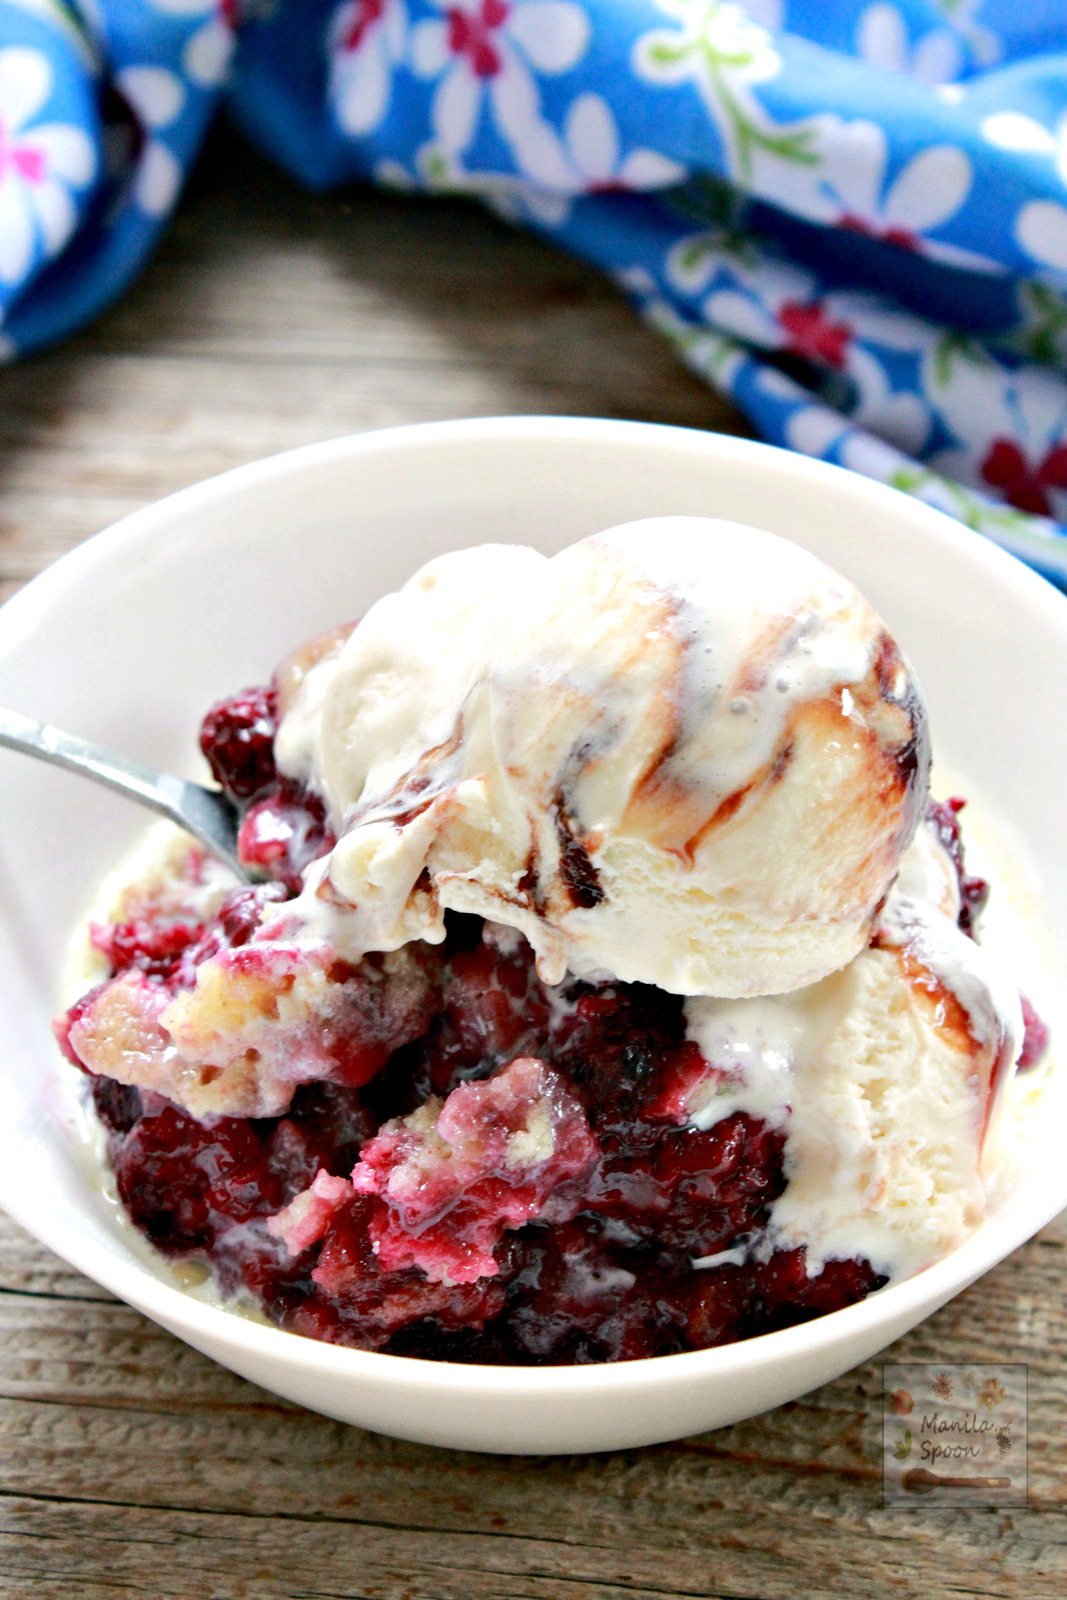 This is so amazingly delicious and unbelievably easy to make! Best of all, no baking required as your slow cooker does all the work. Serve warm with pouring cream or ice cream - heavenly! Slow Cooker Blackberry Cobbler